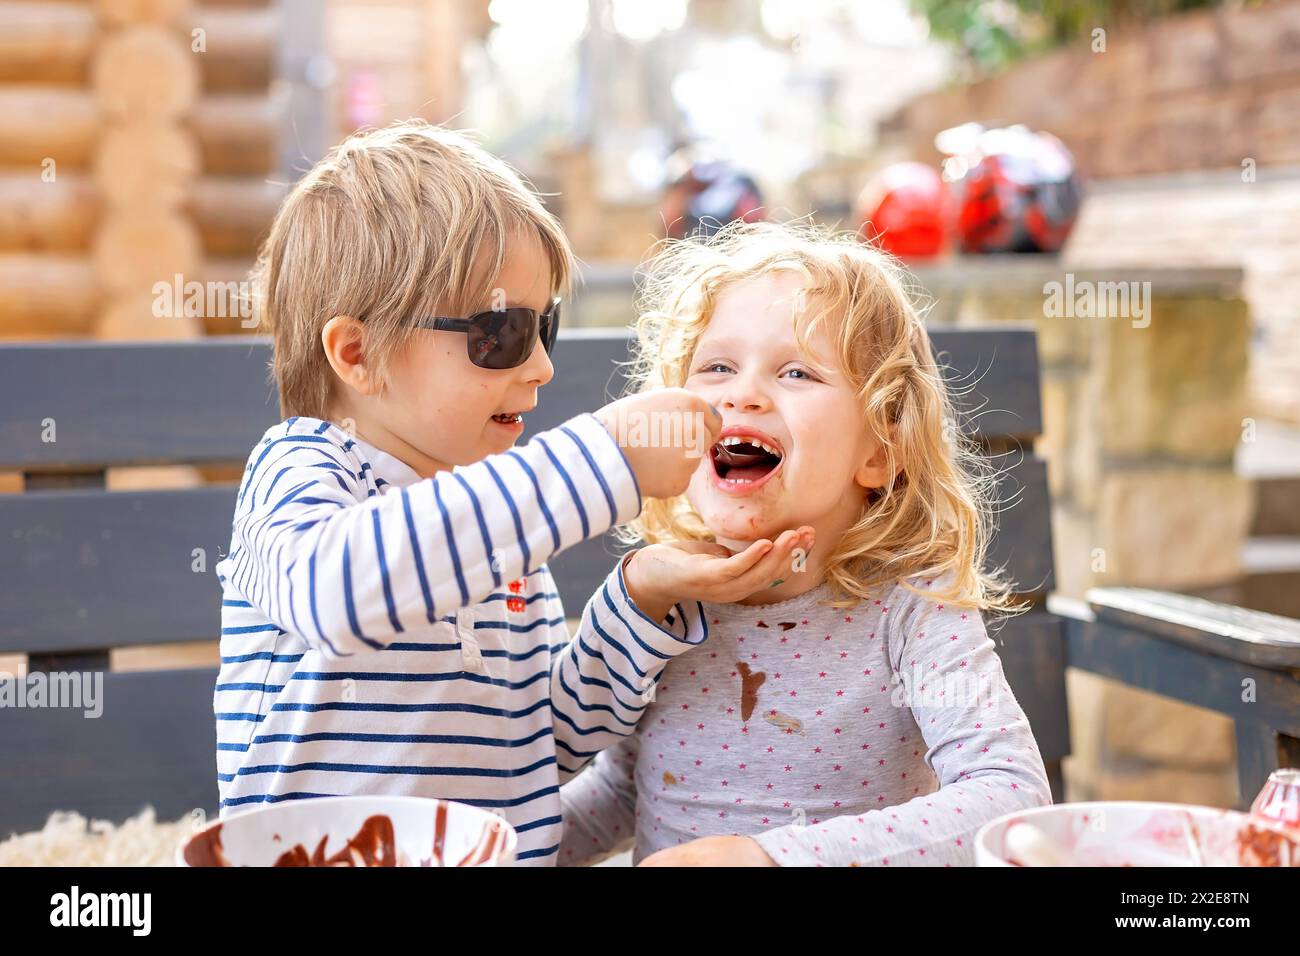 Children, kids, siblings, eating chocolate ice cream spring time, outdoors Stock Photo